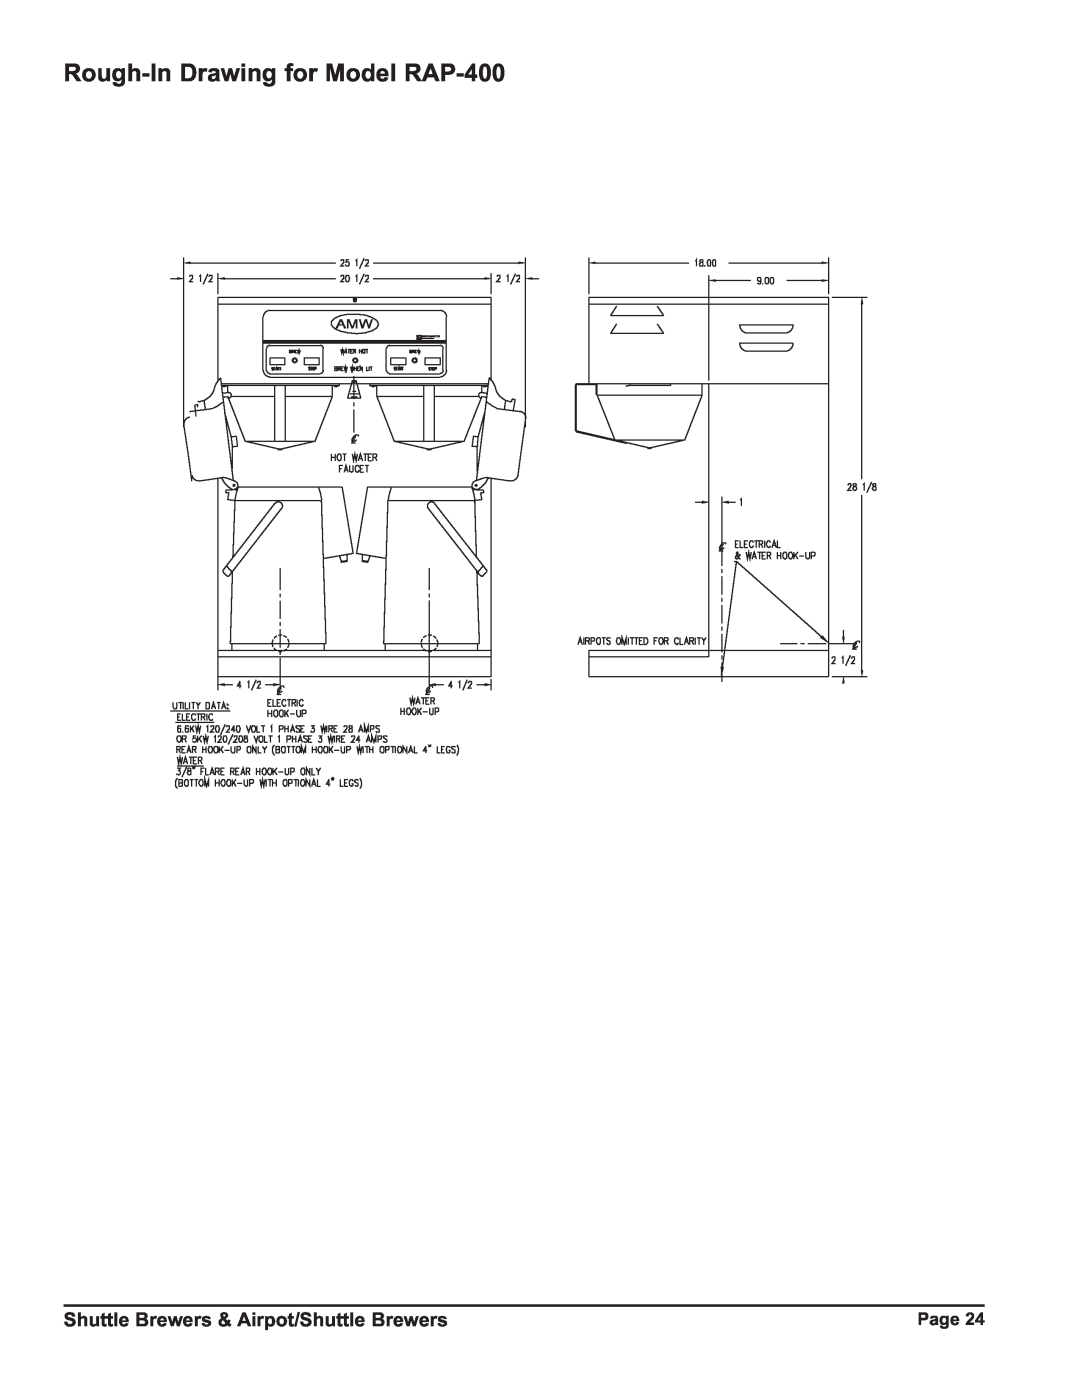 Grindmaster P400ESHP instruction manual Rough-In Drawing for Model RAP-400, Shuttle Brewers & Airpot/Shuttle Brewers 